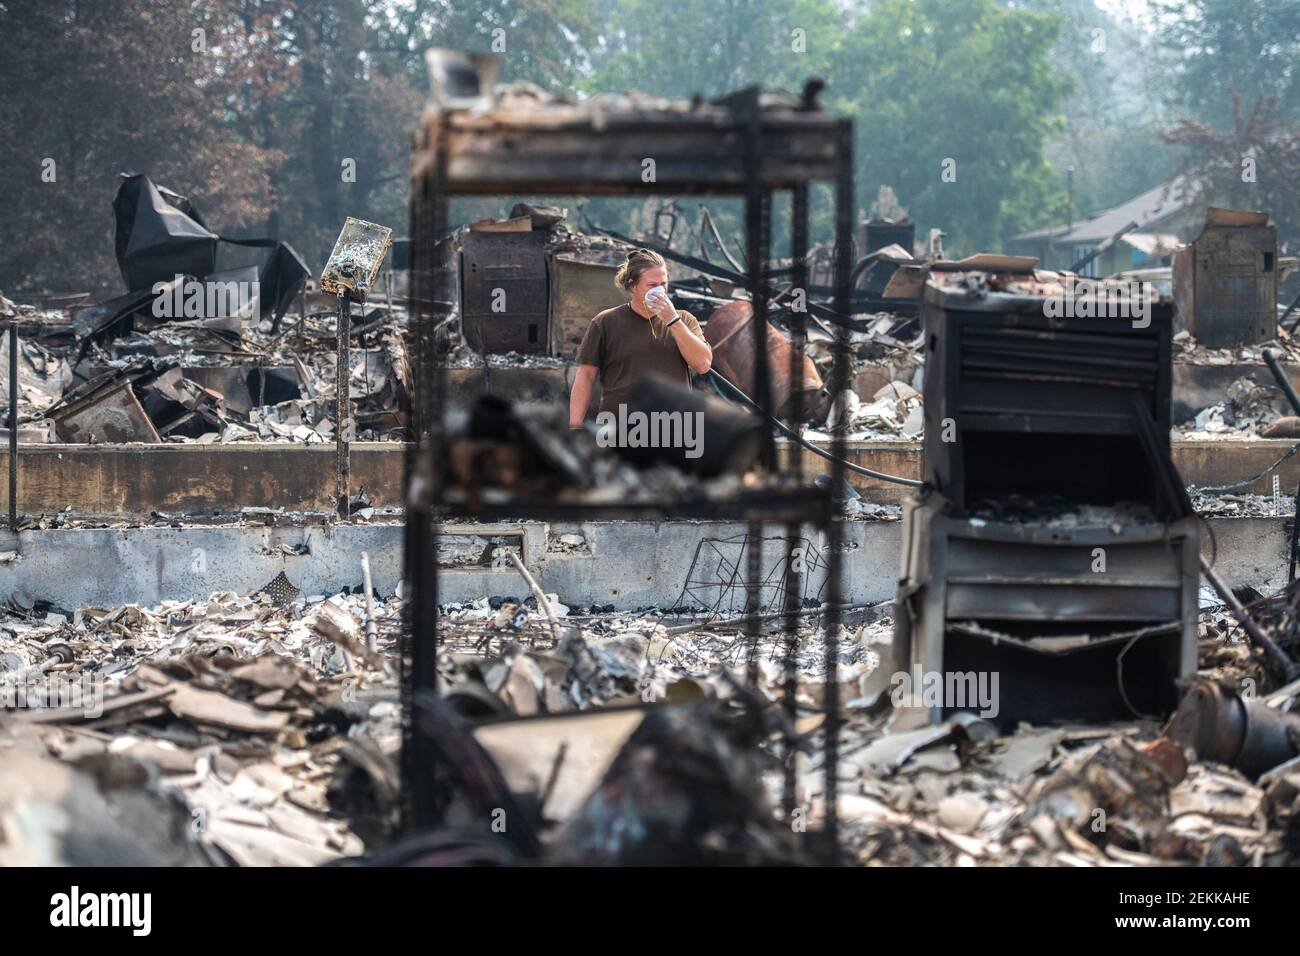 TALENT, ORE - SEPTEMBER 18, 2020: Zach Kuhlow checks the remnants of his house for anything salvagable. His son, who is now 10, was born inside the house. In Talent, about 20 miles north of the California border, homes were charred beyond recognition. Across the western US, at least 87 wildfires are burning, according to the National Interagency Fire Center. They've torched more than 4.7 million acres -- more than six times the area of Rhode Island. Credit: Chris Tuite/imageSPACE/Sipa USA Stock Photo